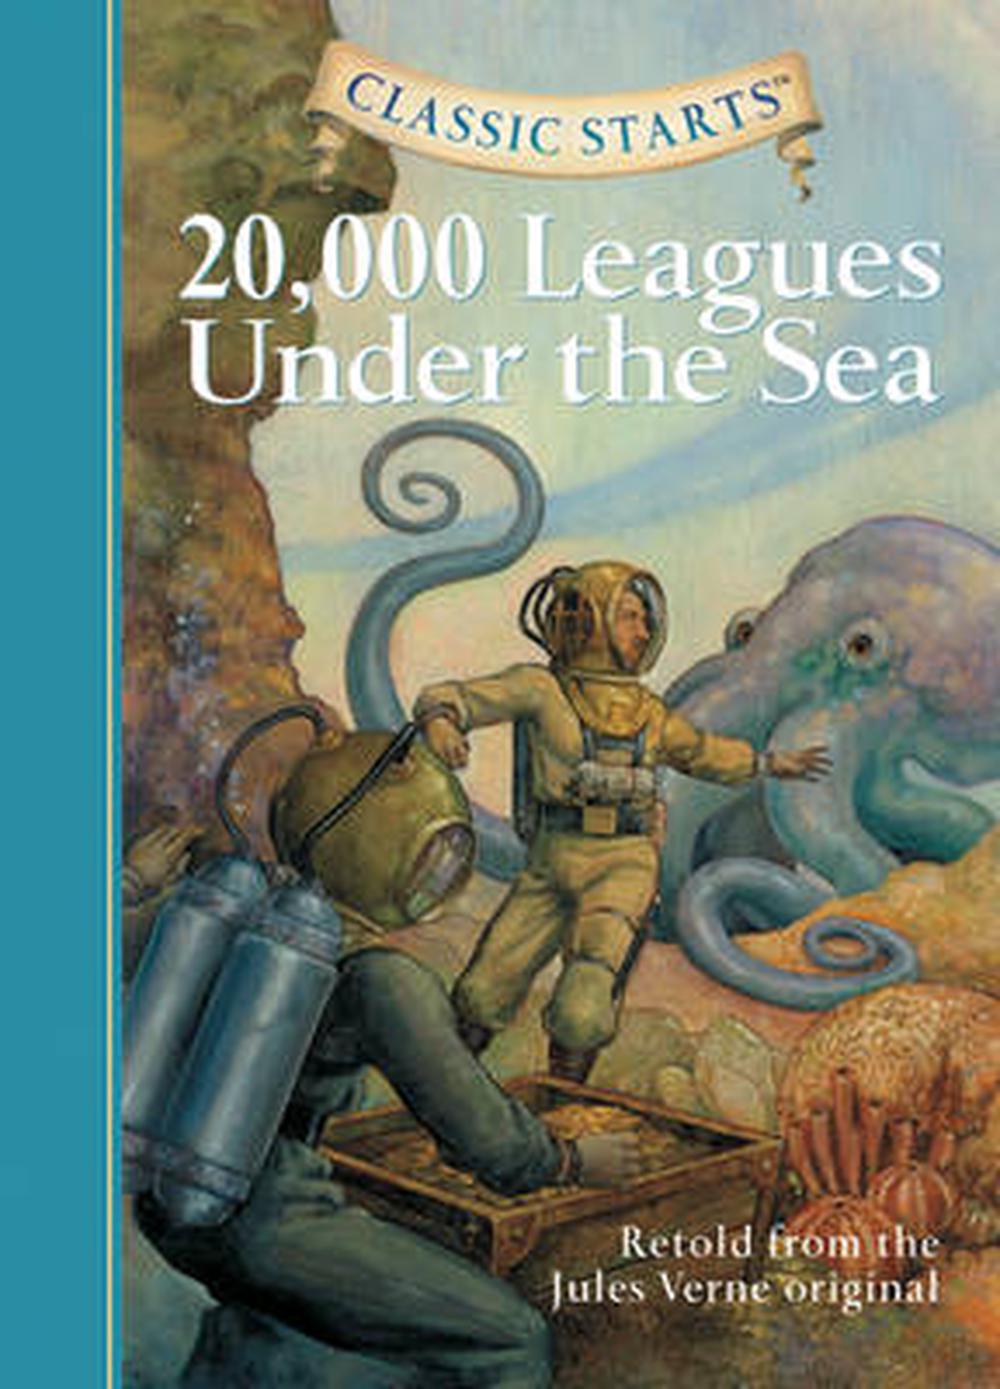 20000 leagues under the sea illustrated